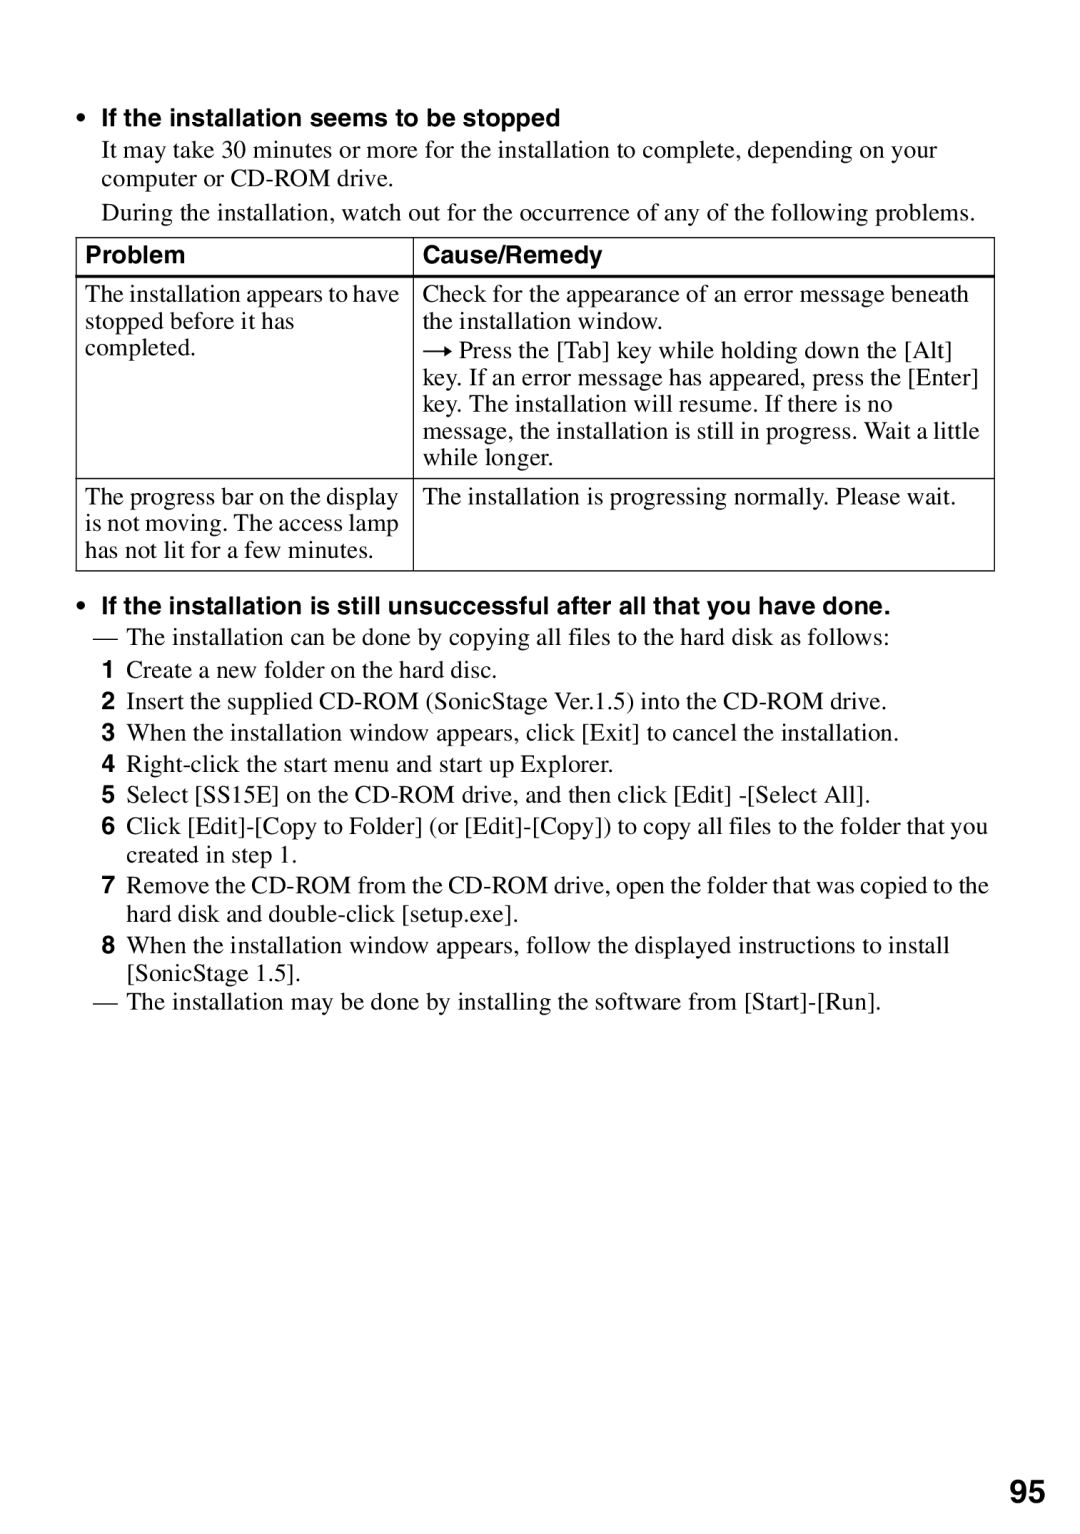 Sony MZ-N510 operating instructions •If the installation seems to be stopped, Problem, Cause/Remedy 